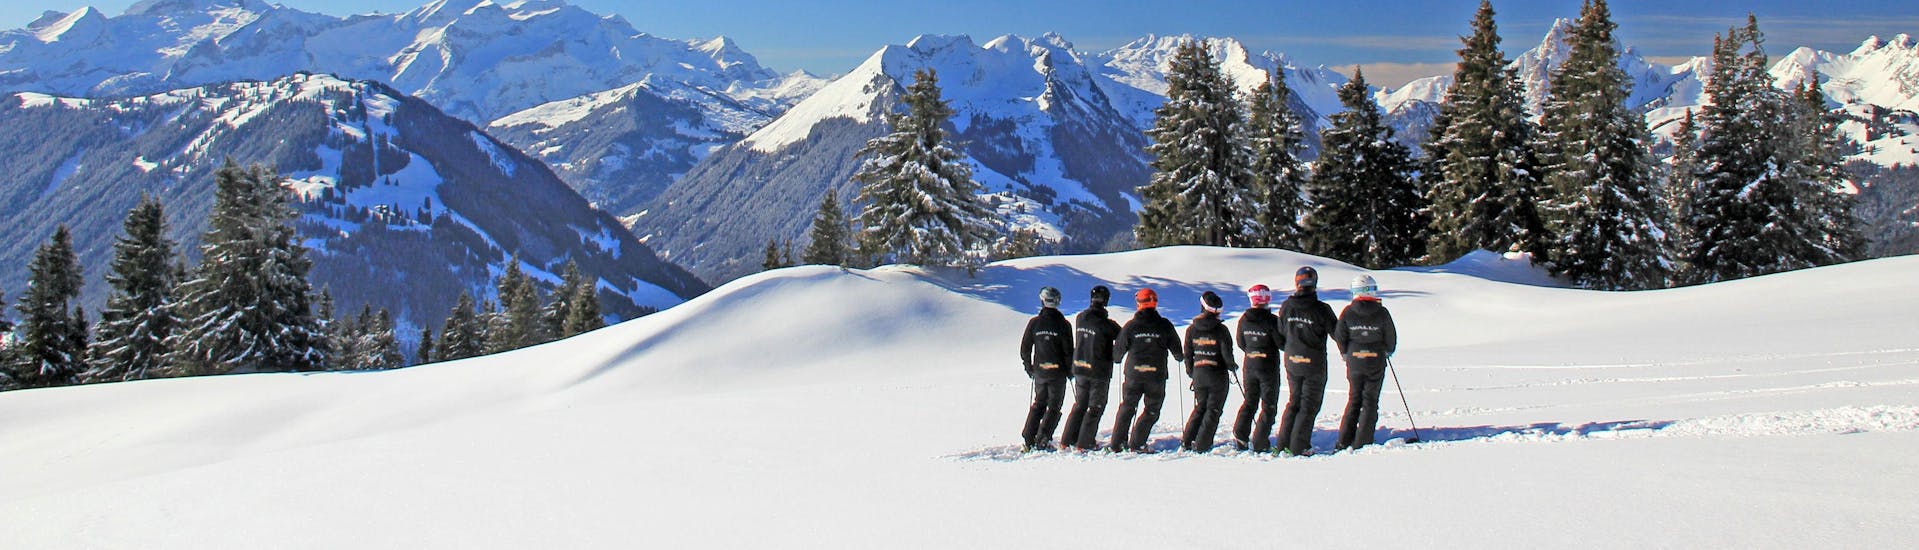 Private Ski Lessons for Kids of All Ages - Full Day with Private Snowsports Team Gstaad - Hero image